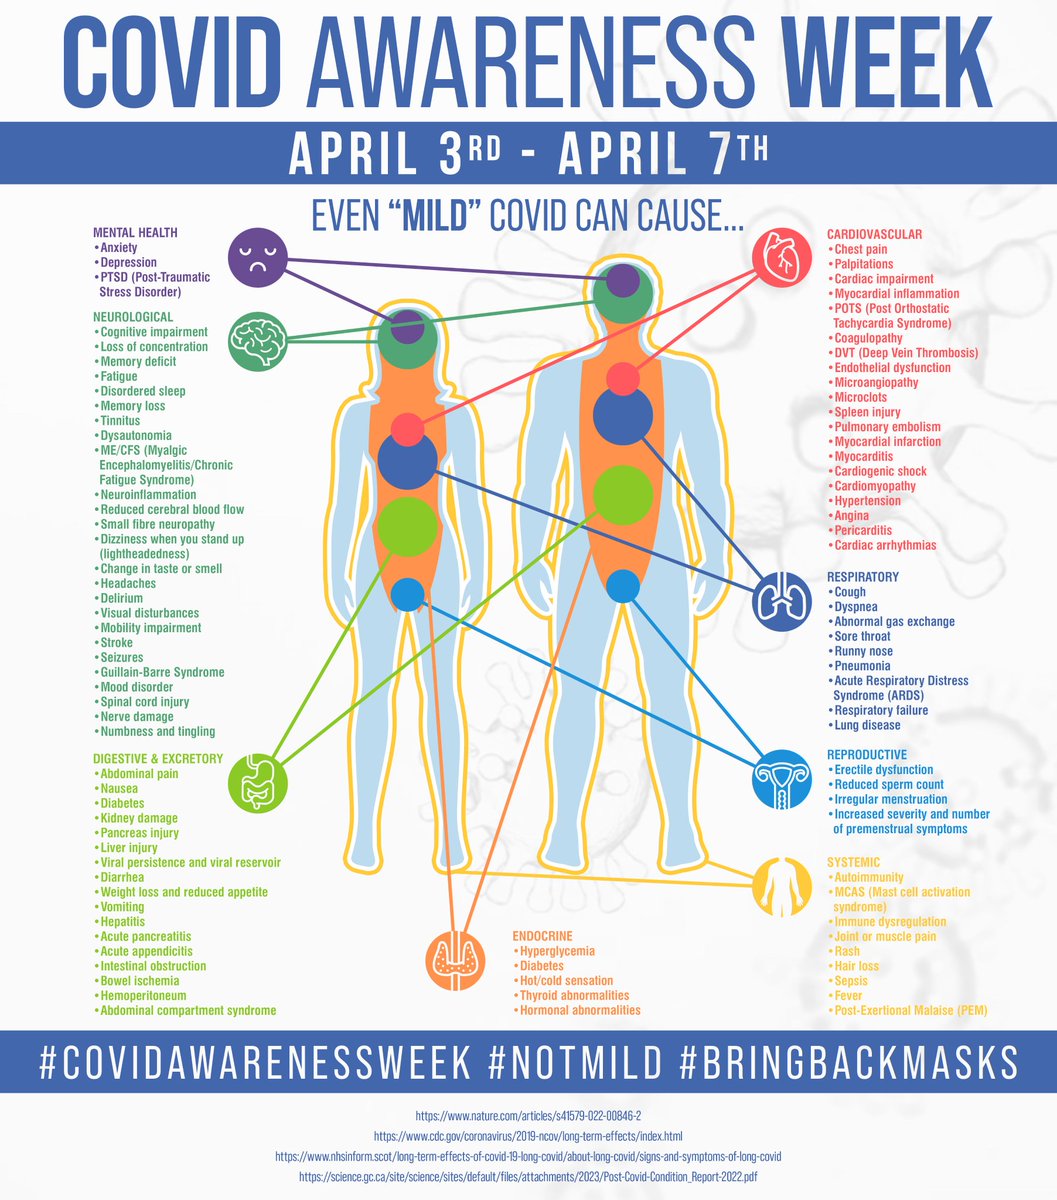 How does COVID cause long term harm? Let me count the ways...

A 🧵

#CovidIsntOver
#NotMild
#CovidAwarenessWeek
#BringBackMasks